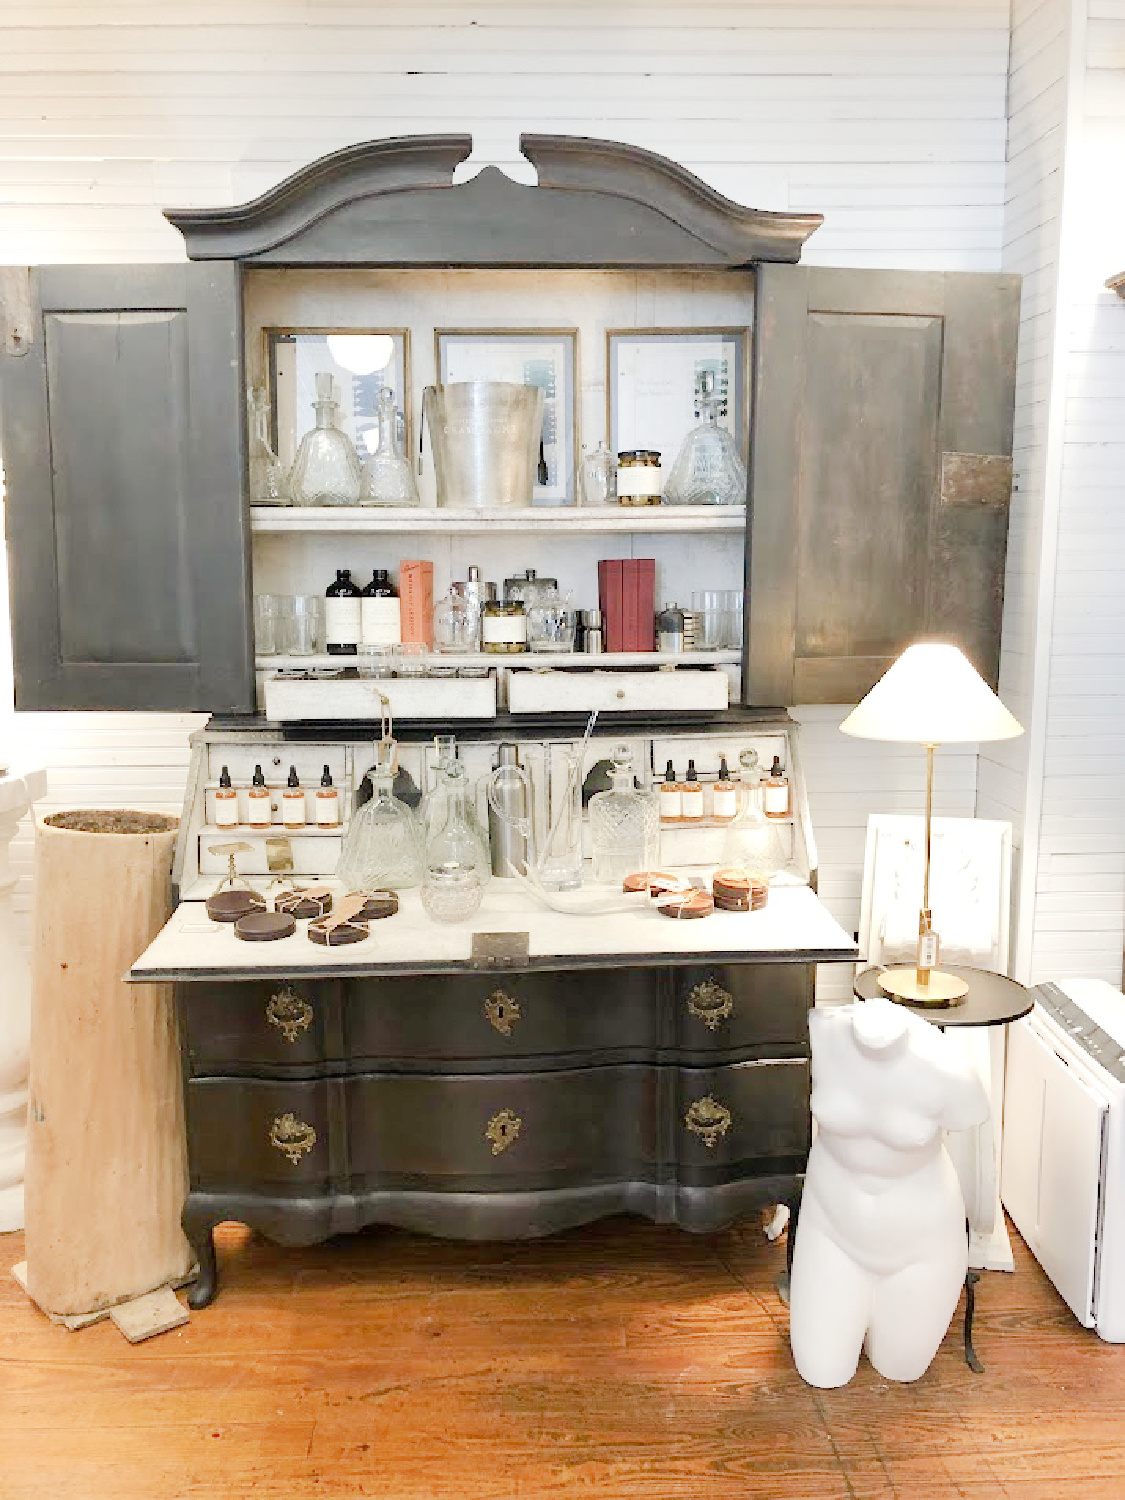 Antique cupboard and home goods in Patina Home & Garden shop from Giannettis in Leiper's Fork, TN - Hello Lovely Studio. #patinahome #leipersforktn